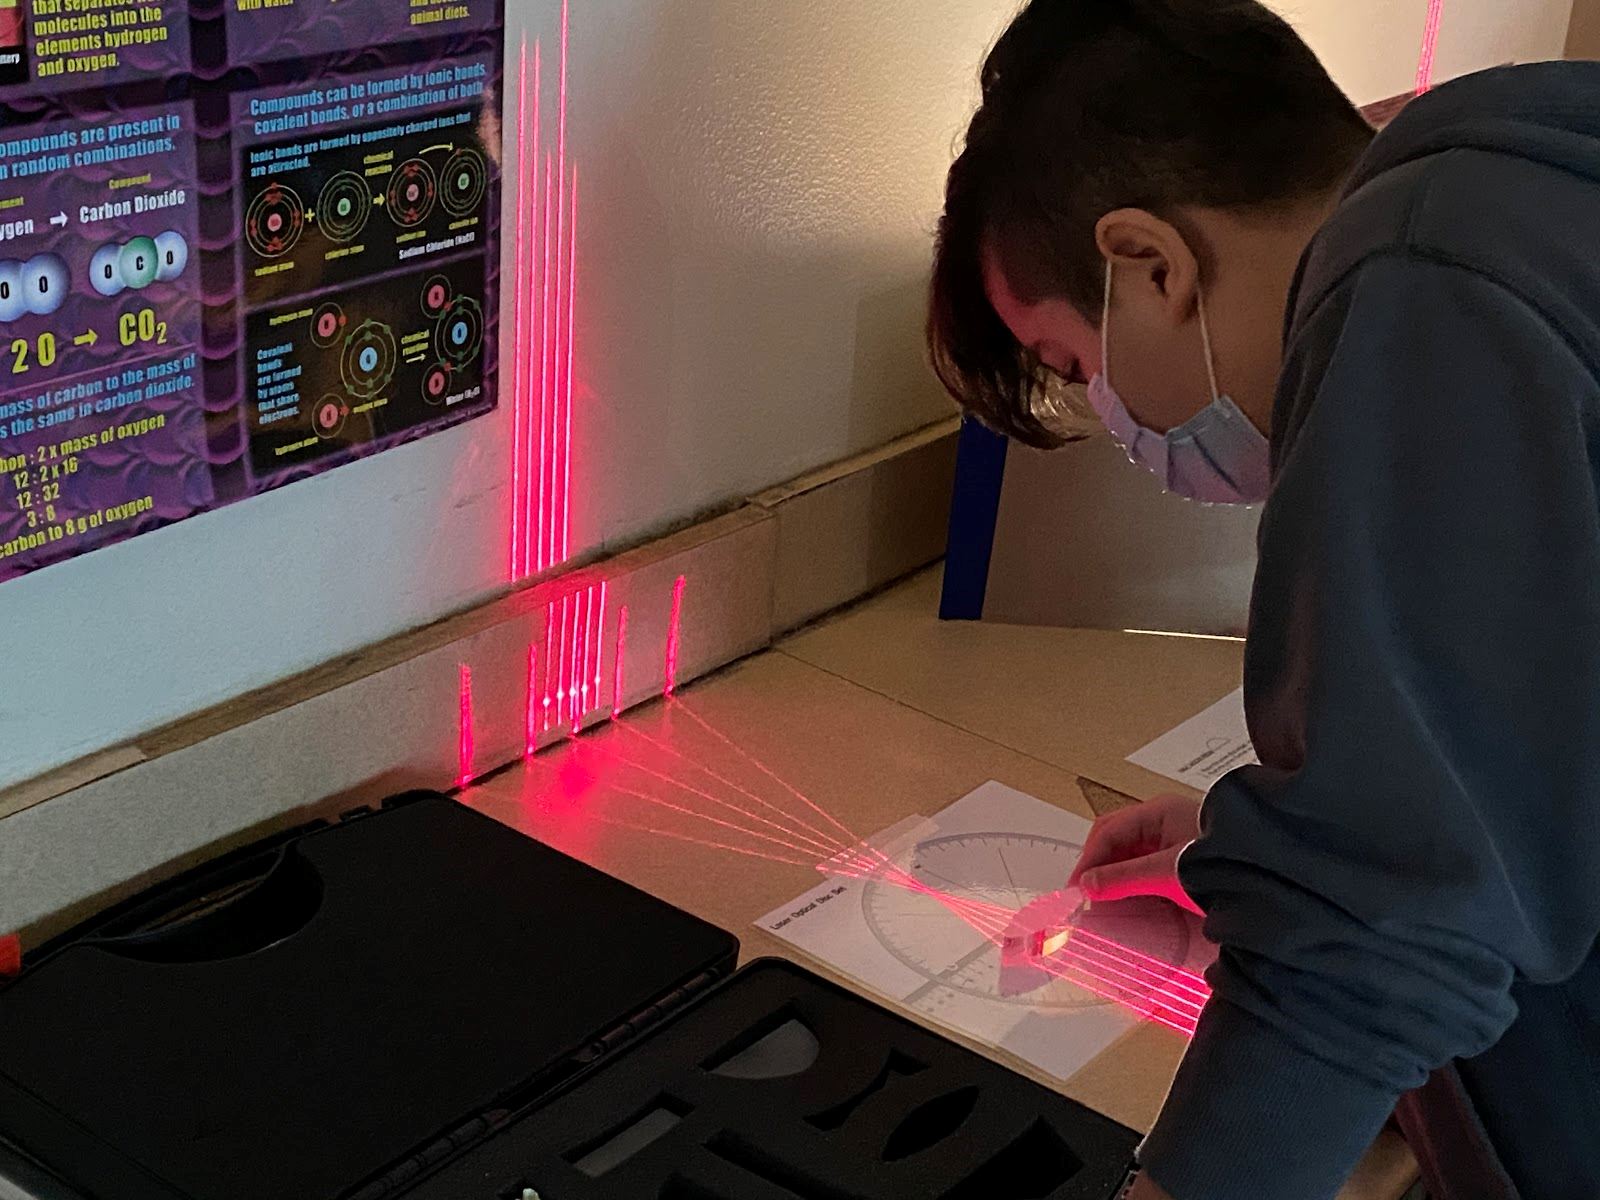 Students learn about laser rays thanks to Foundation grant